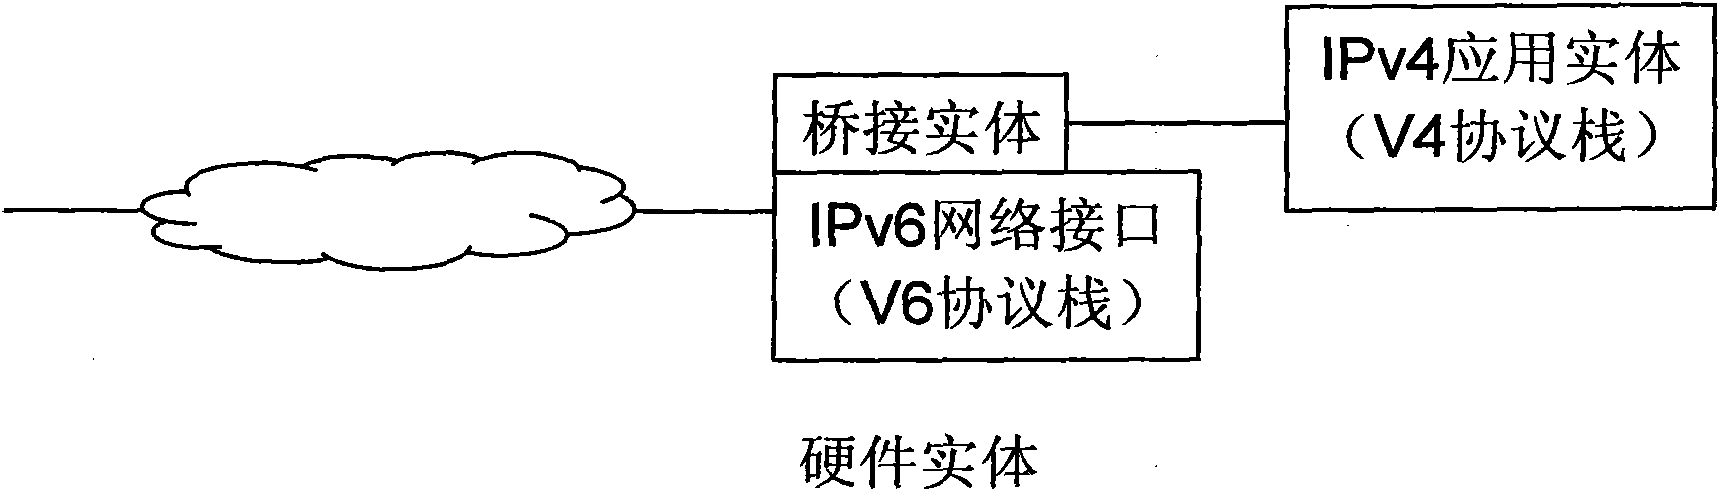 Method and device of network communication through IPv6 (internet protocol version 6) at IPv4 (internet protocol version 4) application environment